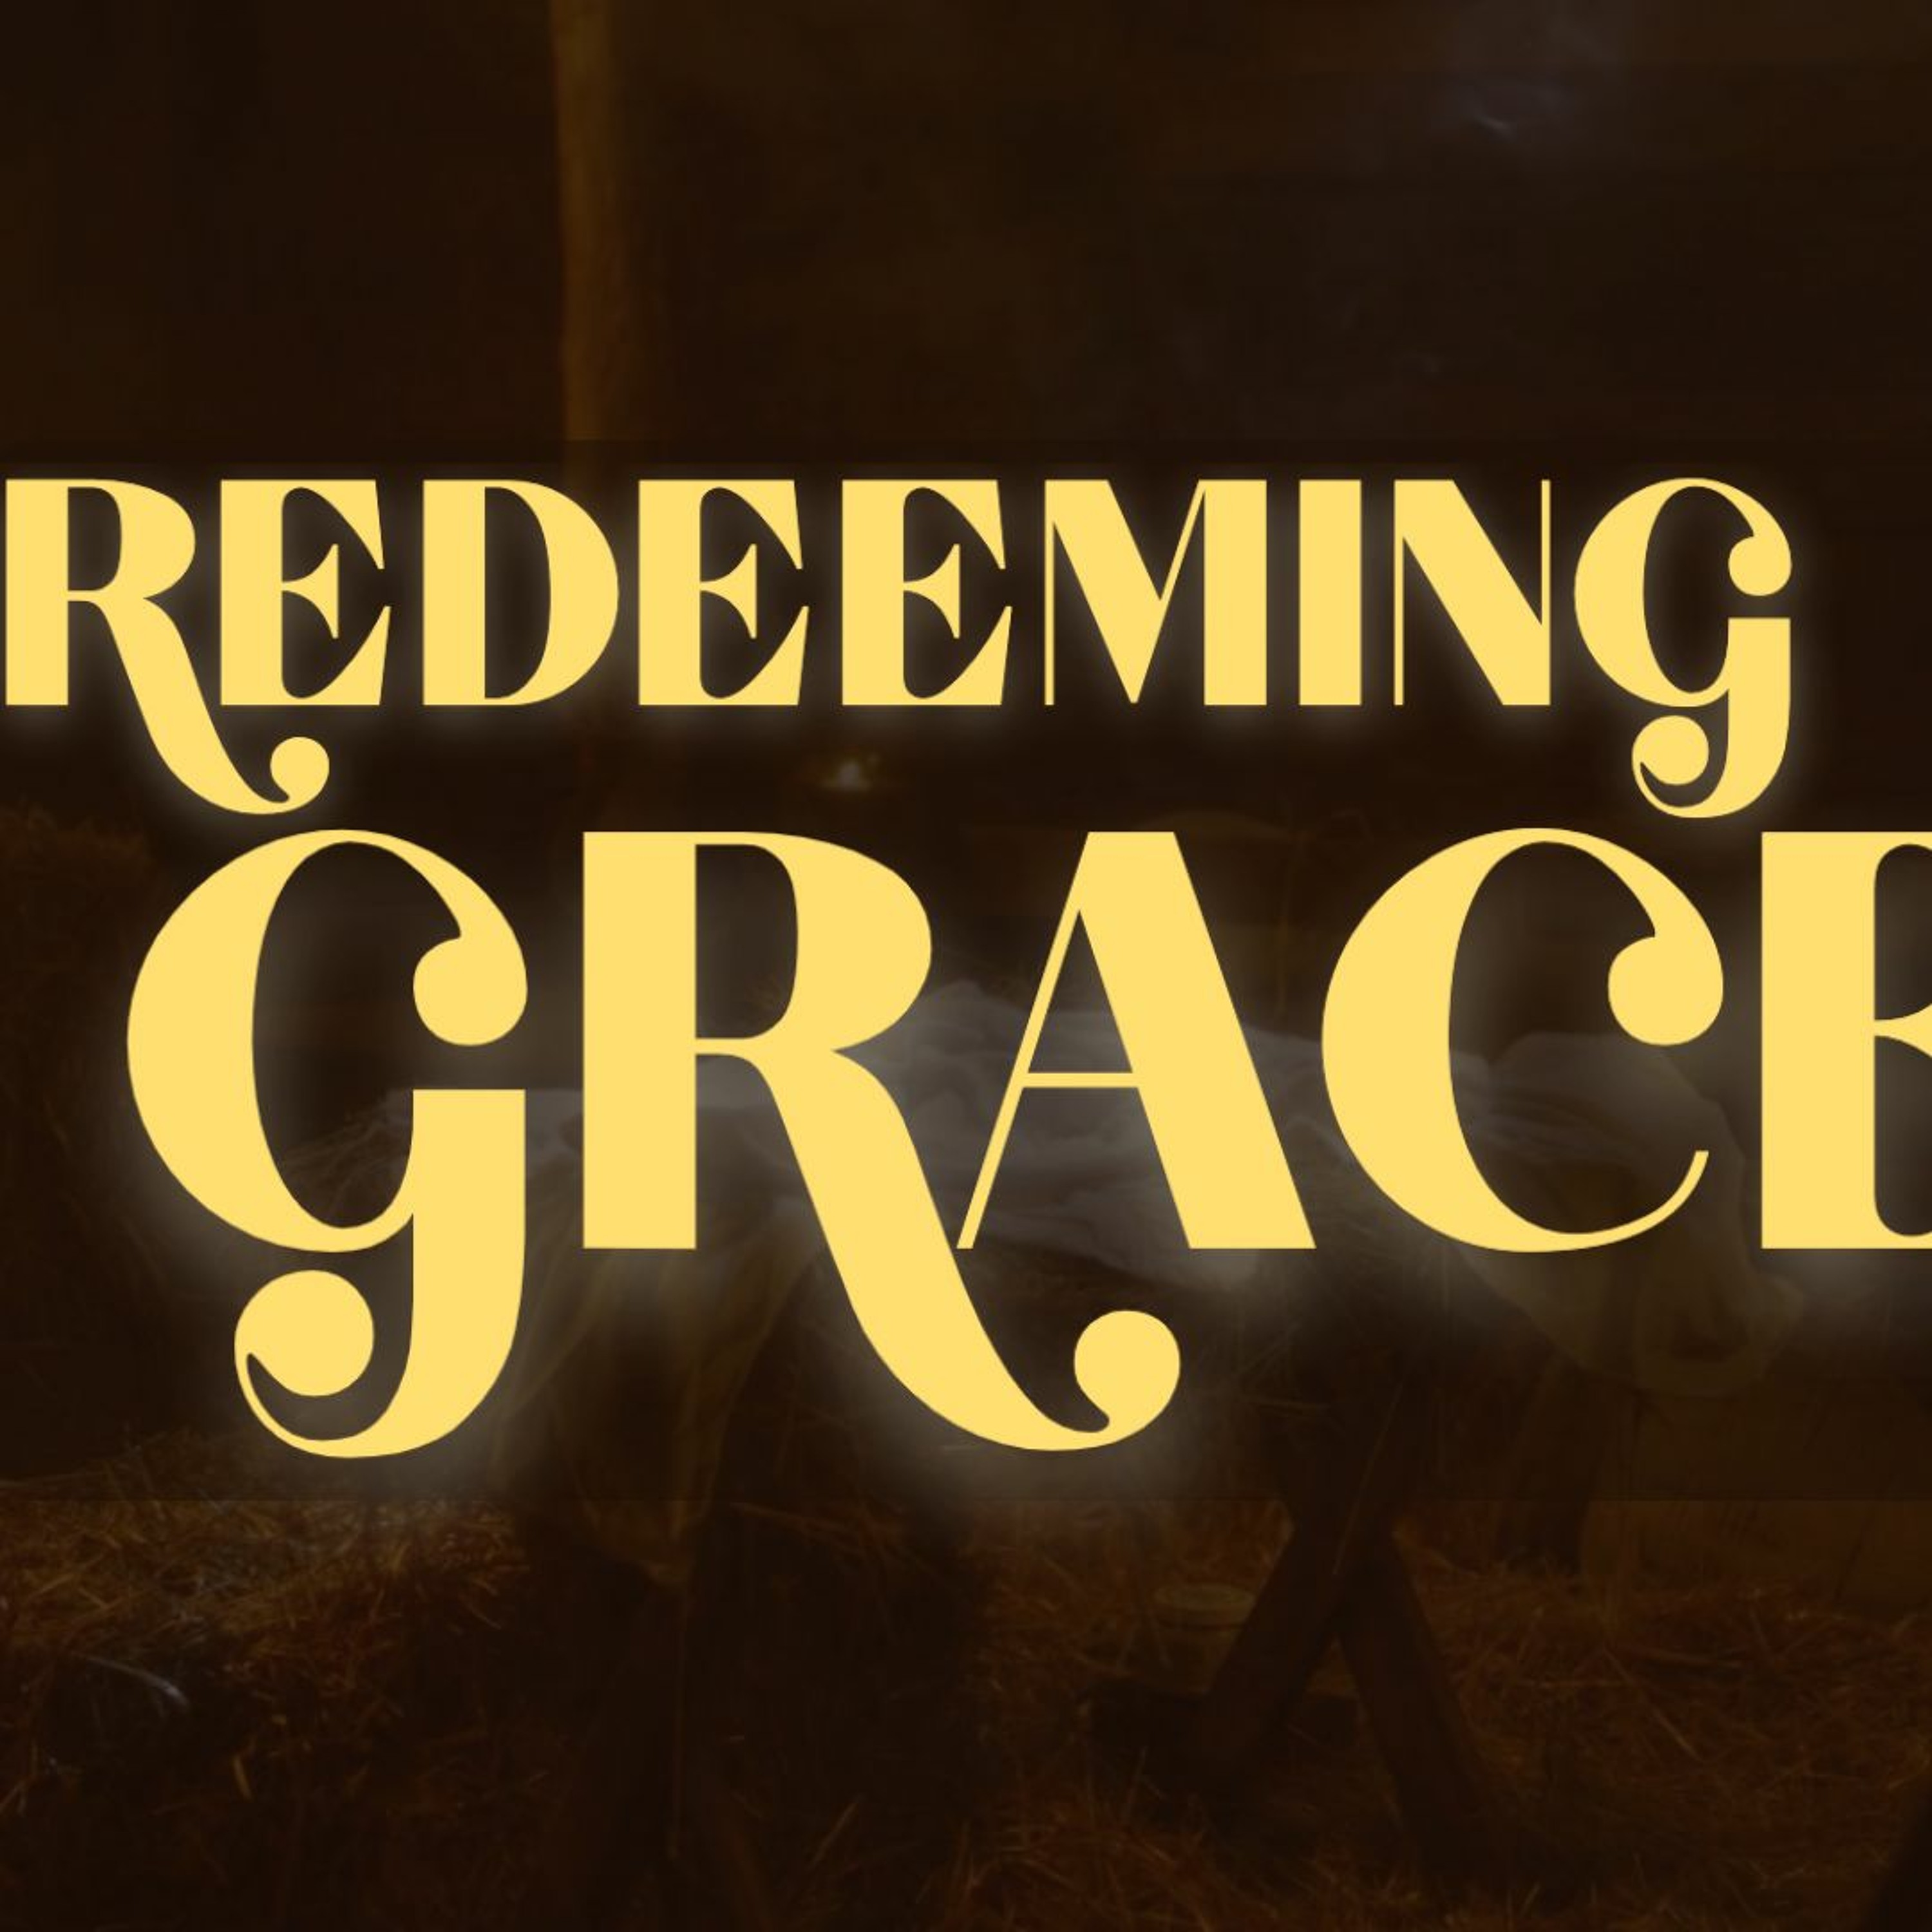 Don’t Tell Me What To Do! :: Redeeming Grace Pt. 1